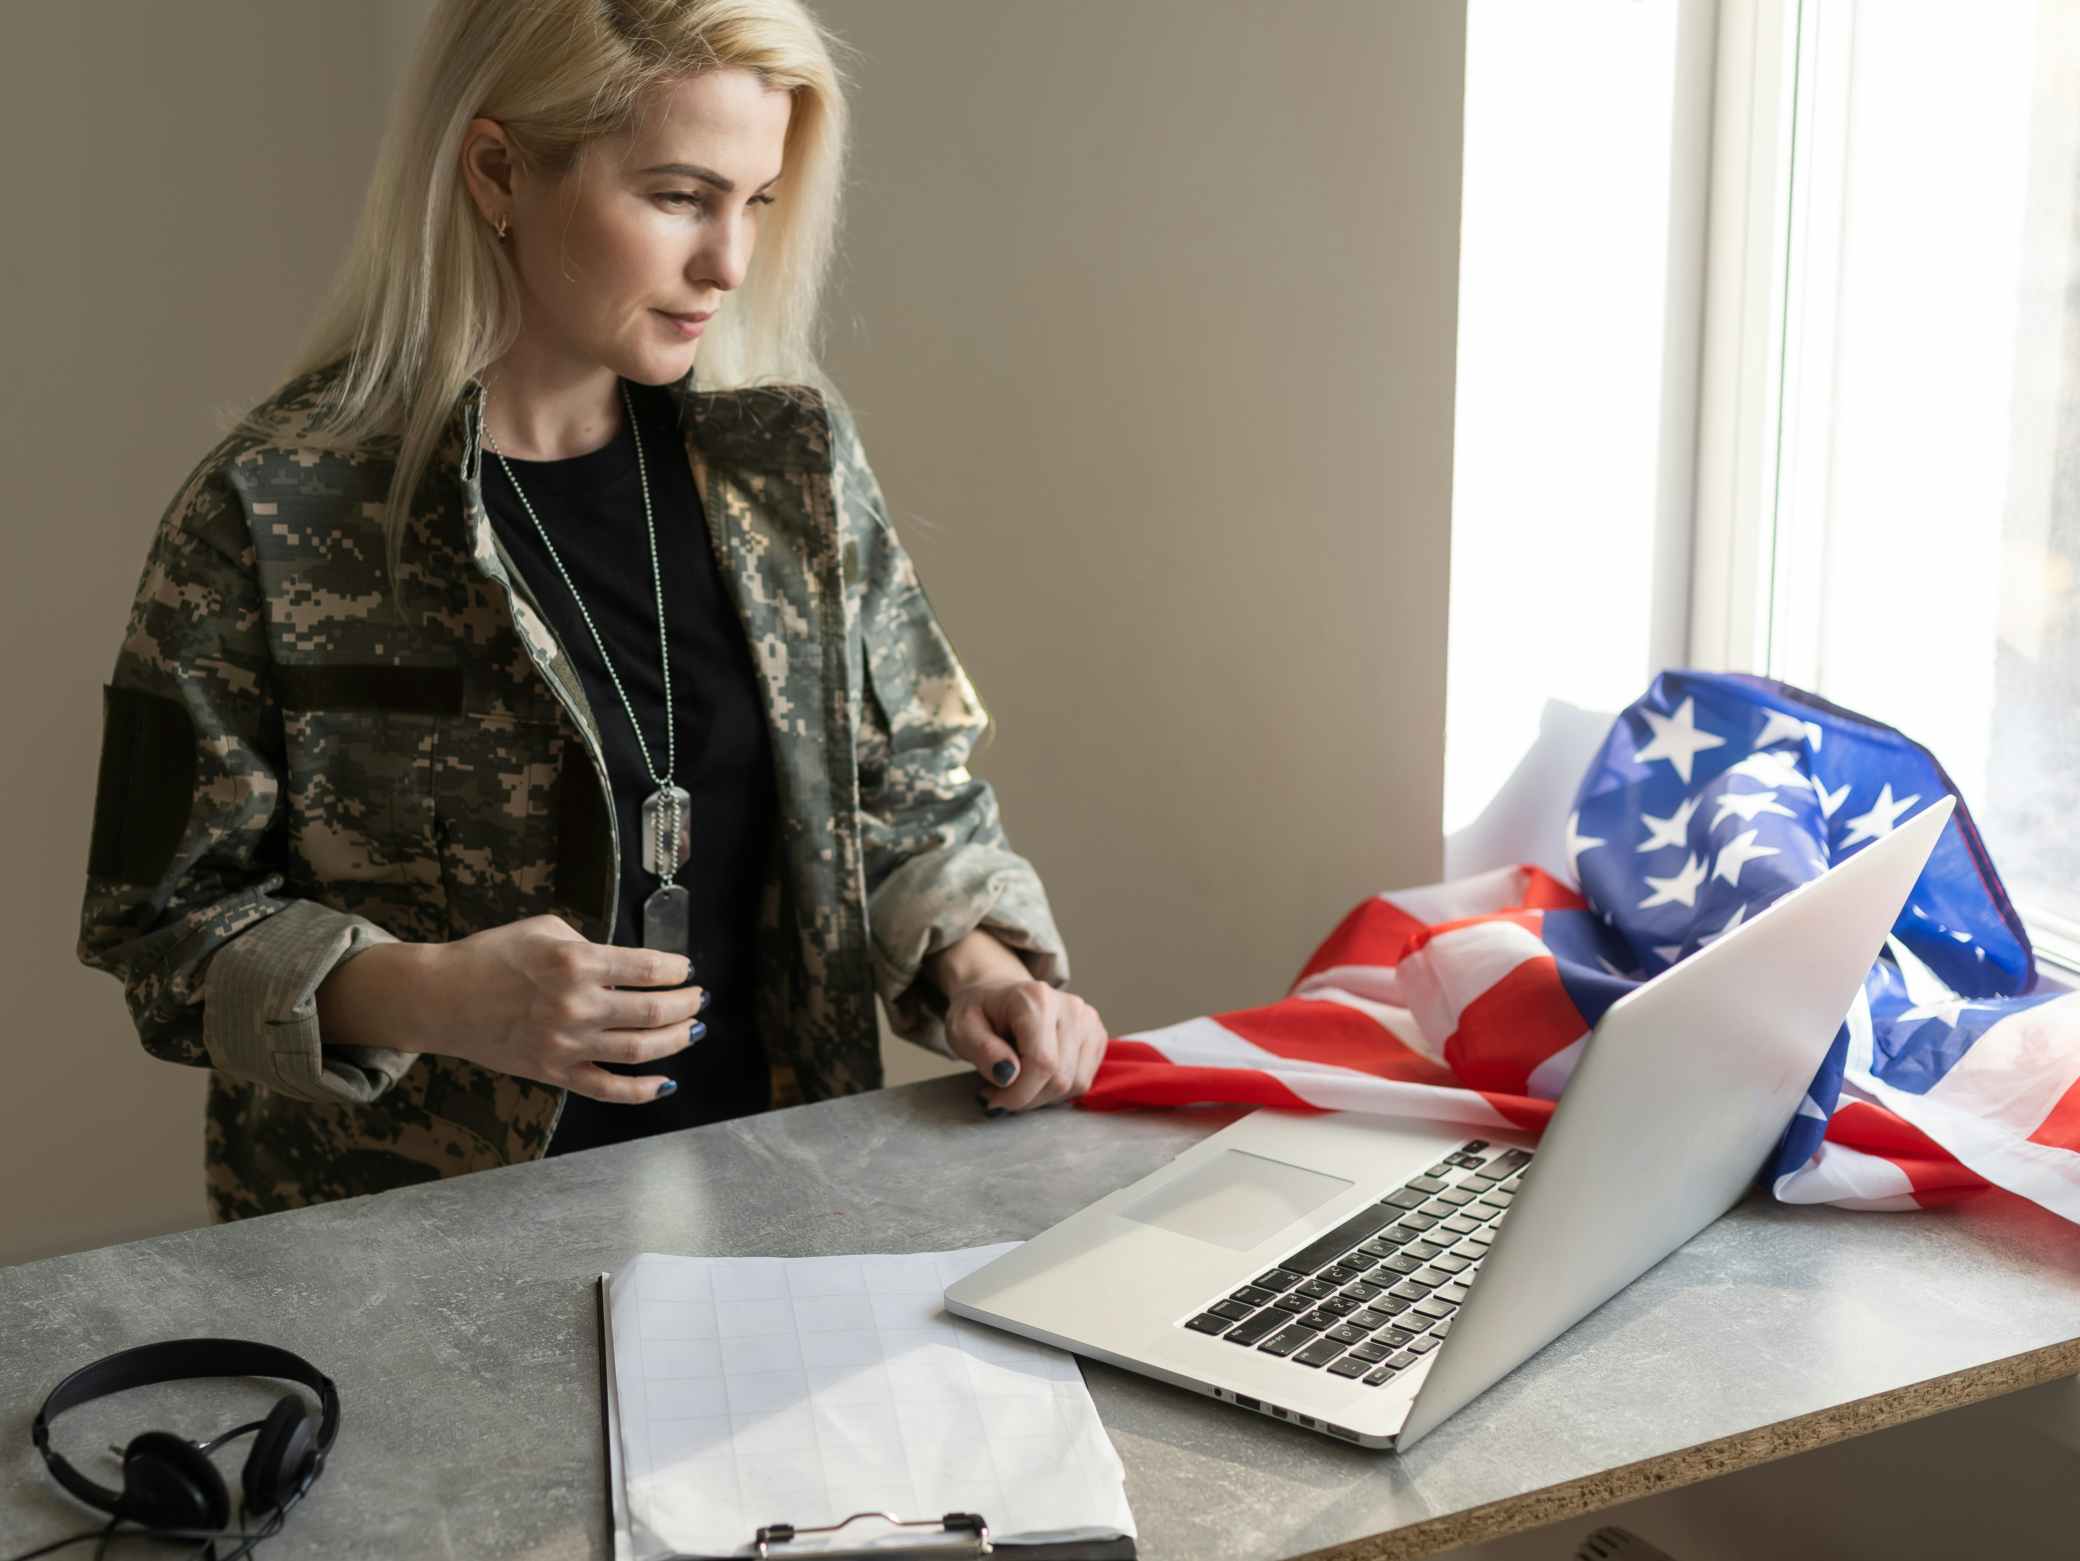 Female military looking at her laptop, on the counter there is a black headset and the american flag